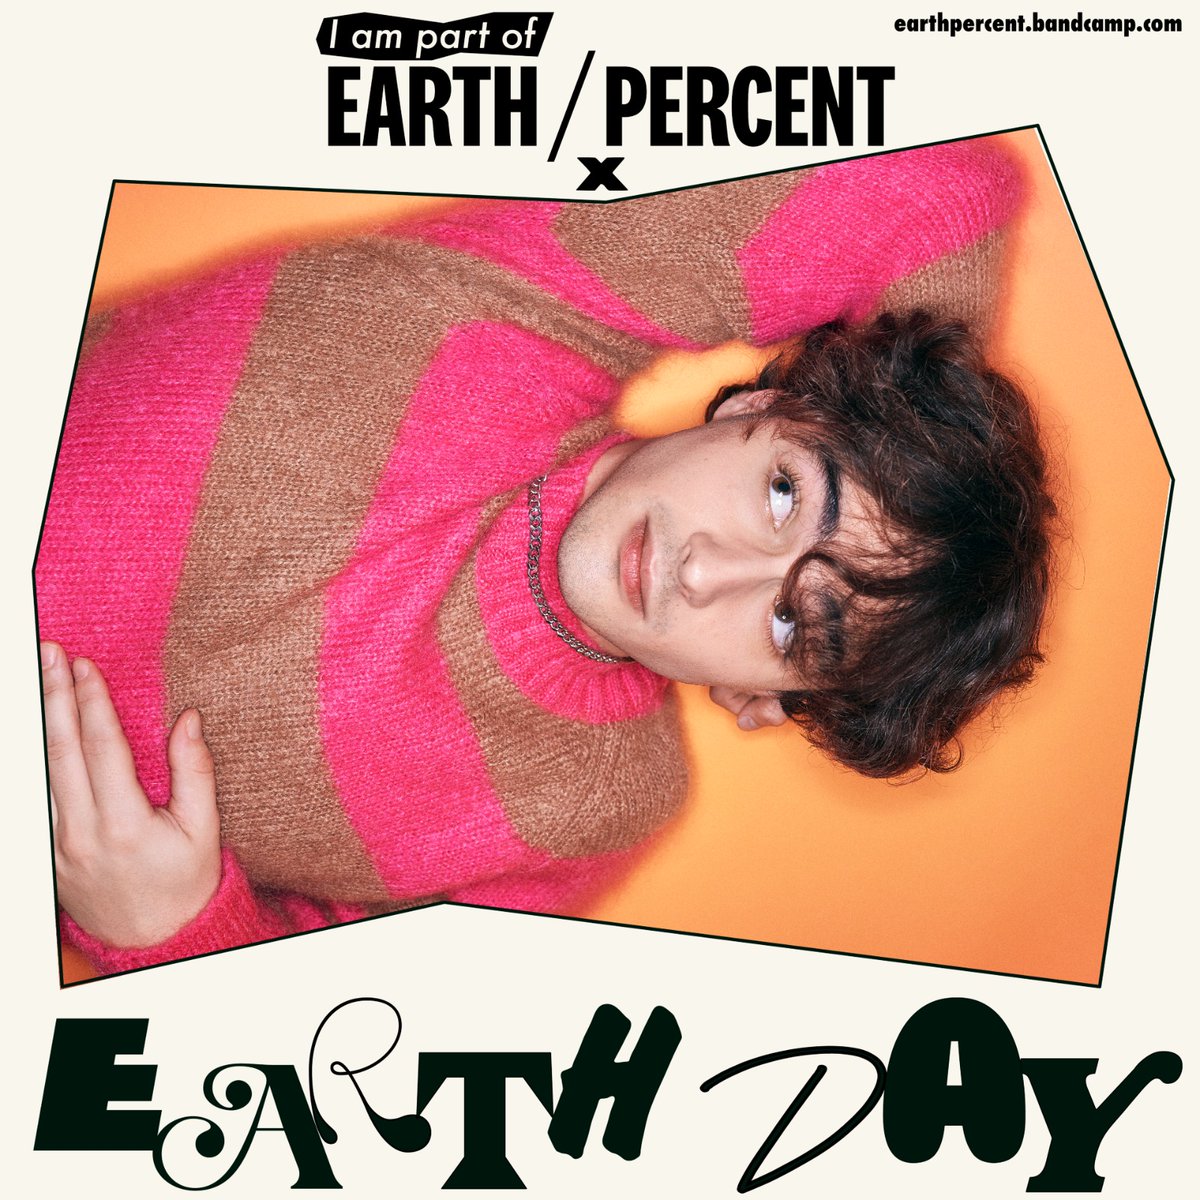 For the next 24 hrs, you can buy the Earth Day track along with 100s of others as part of the #EarthPercentEarthDay Compilation Album - released on @Bandcamp Friday to raise money for climate orgs. 
Take action for our 🌍 & get an epic bundle of music: earthpercent.bandcamp.com